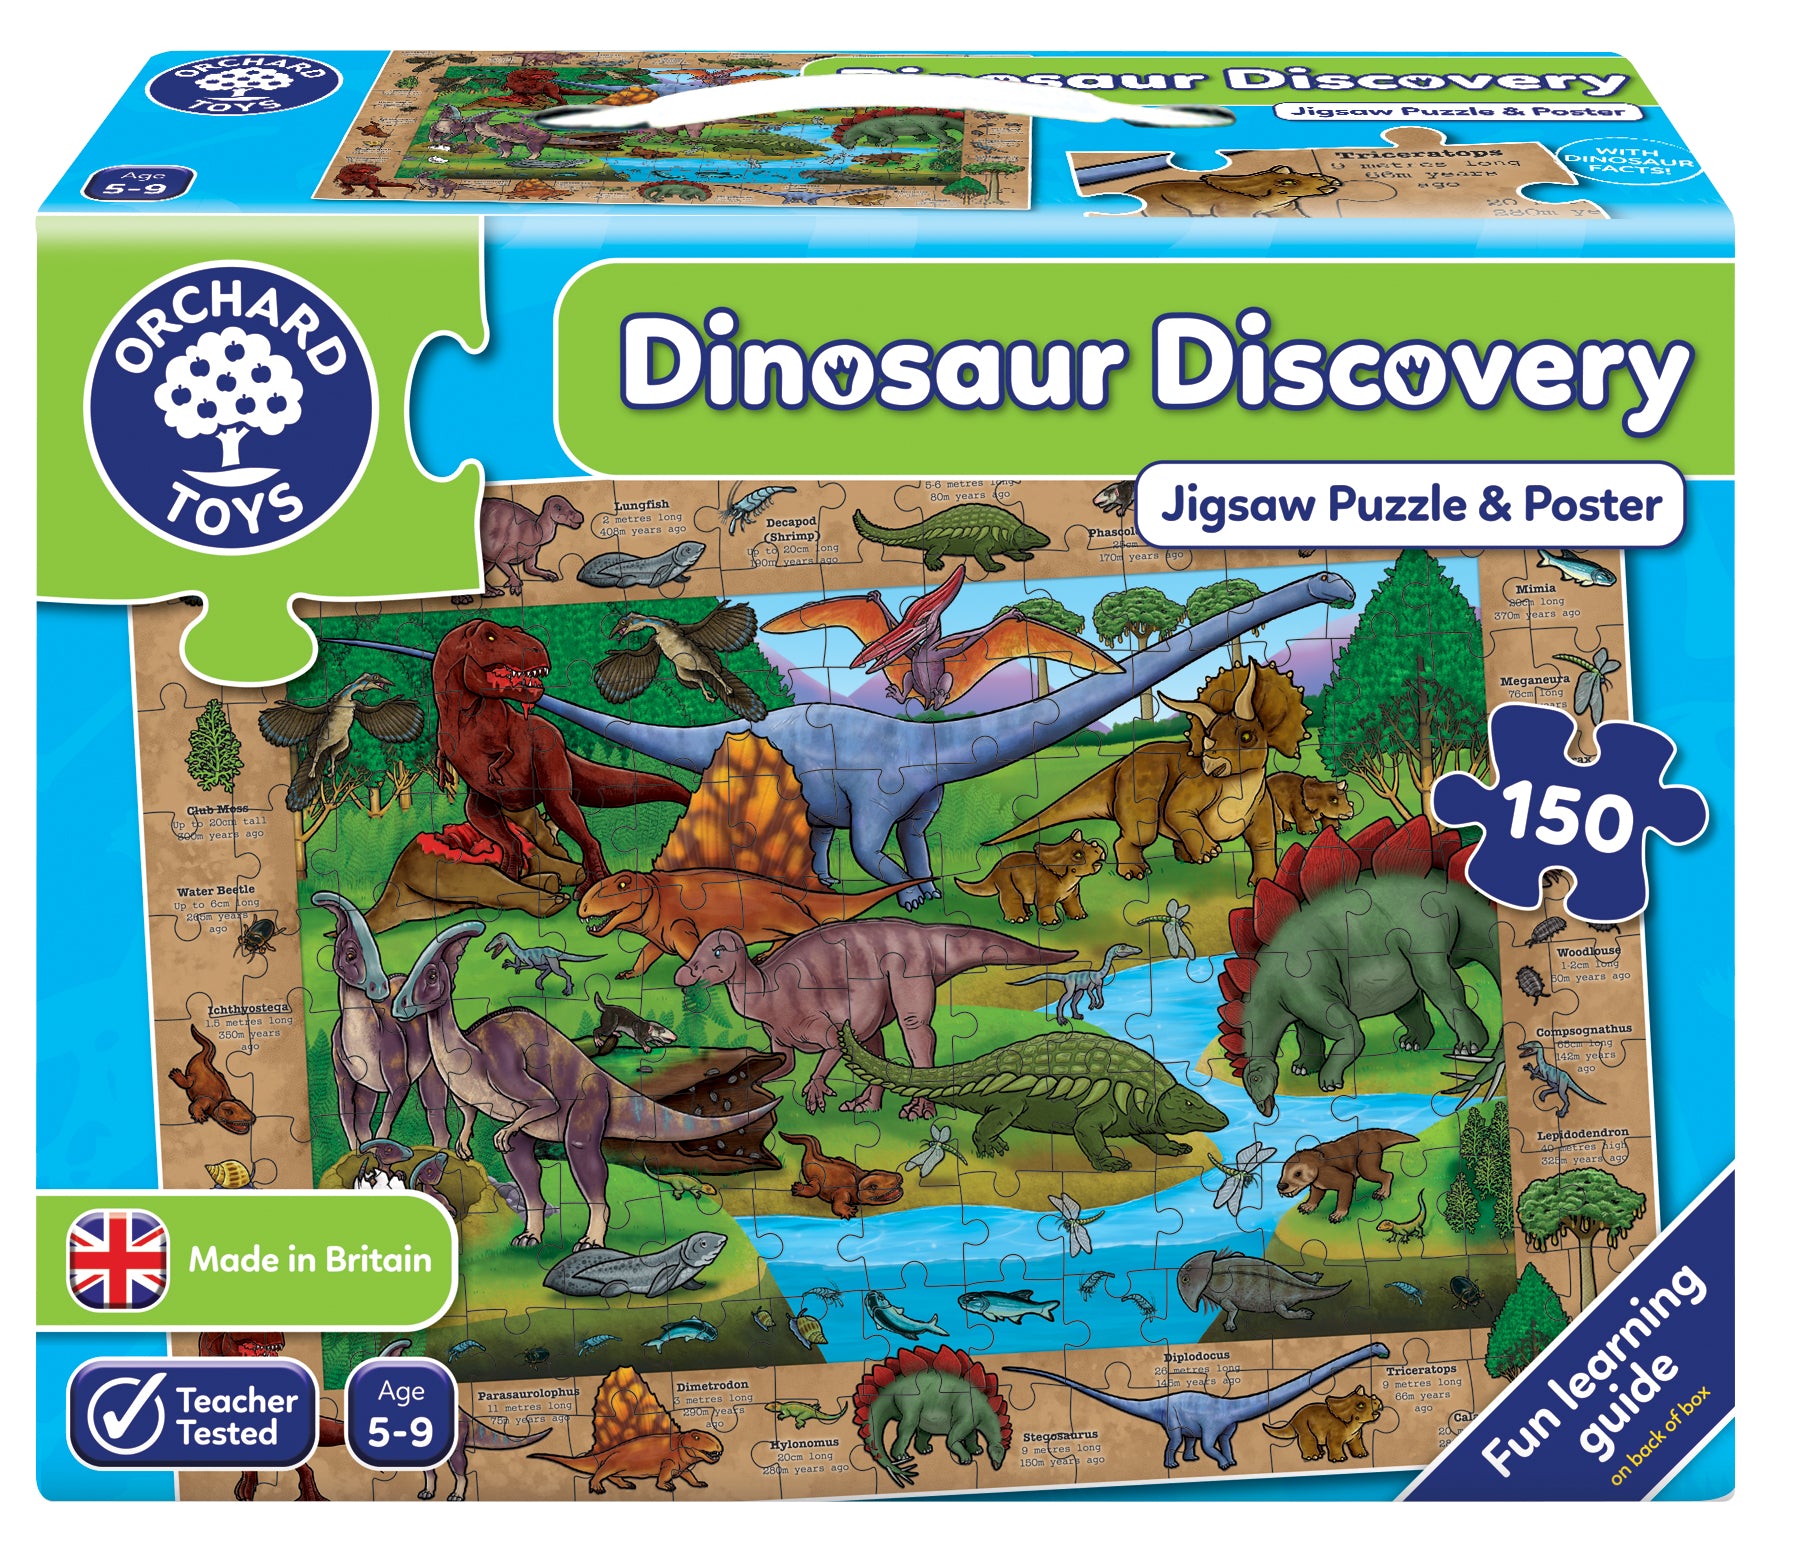 Orchard Dinosaur Discovery